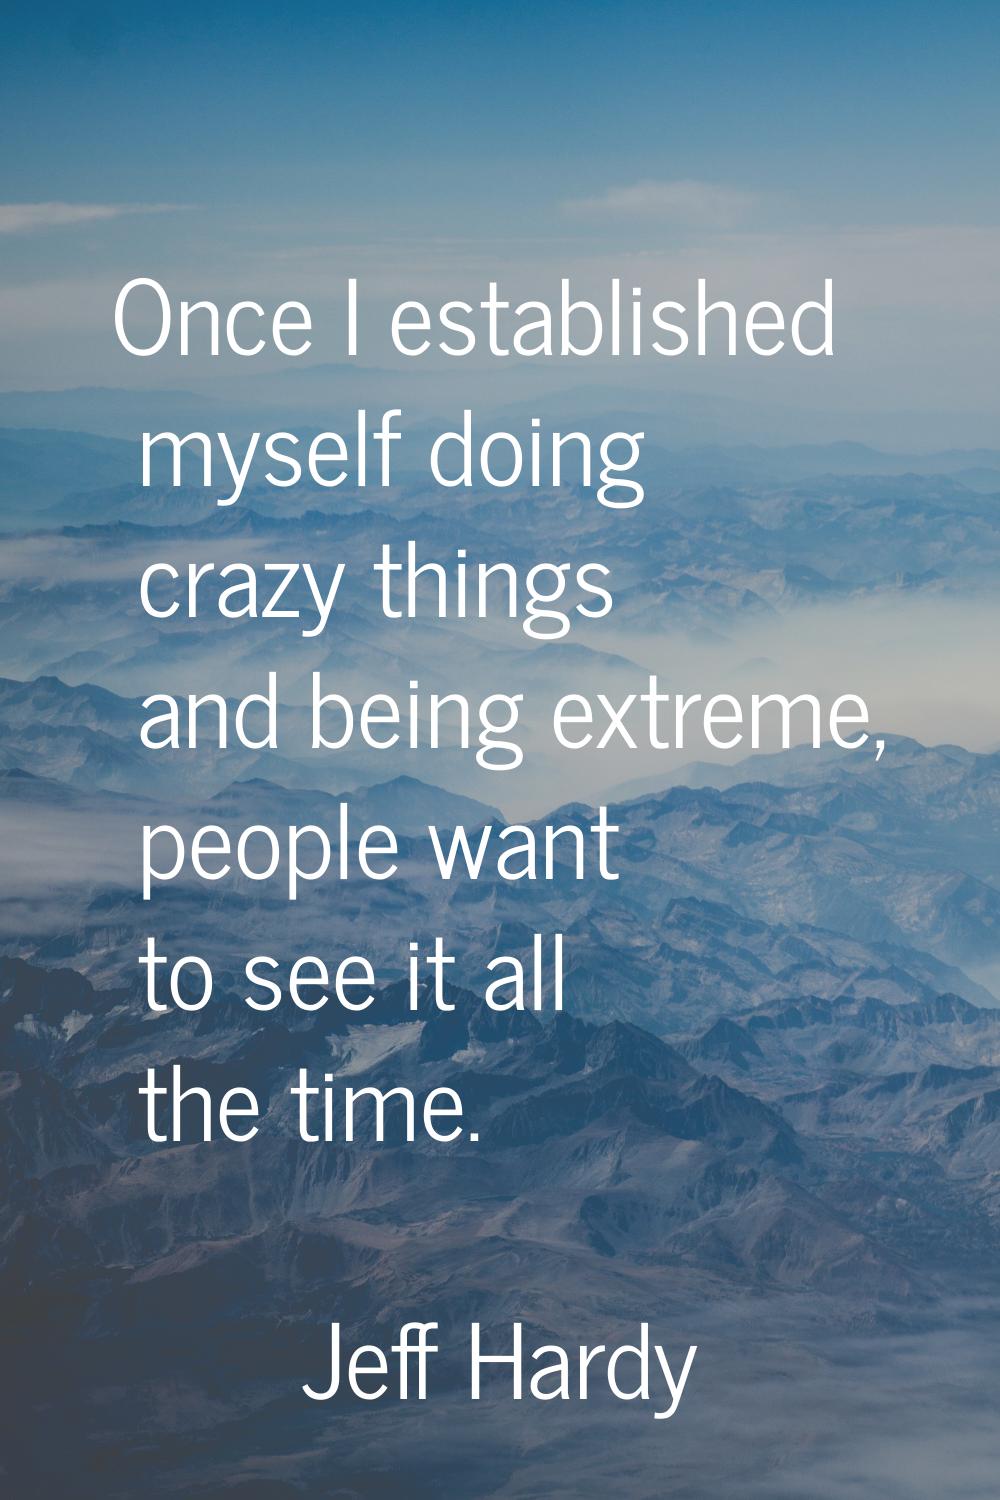 Once I established myself doing crazy things and being extreme, people want to see it all the time.